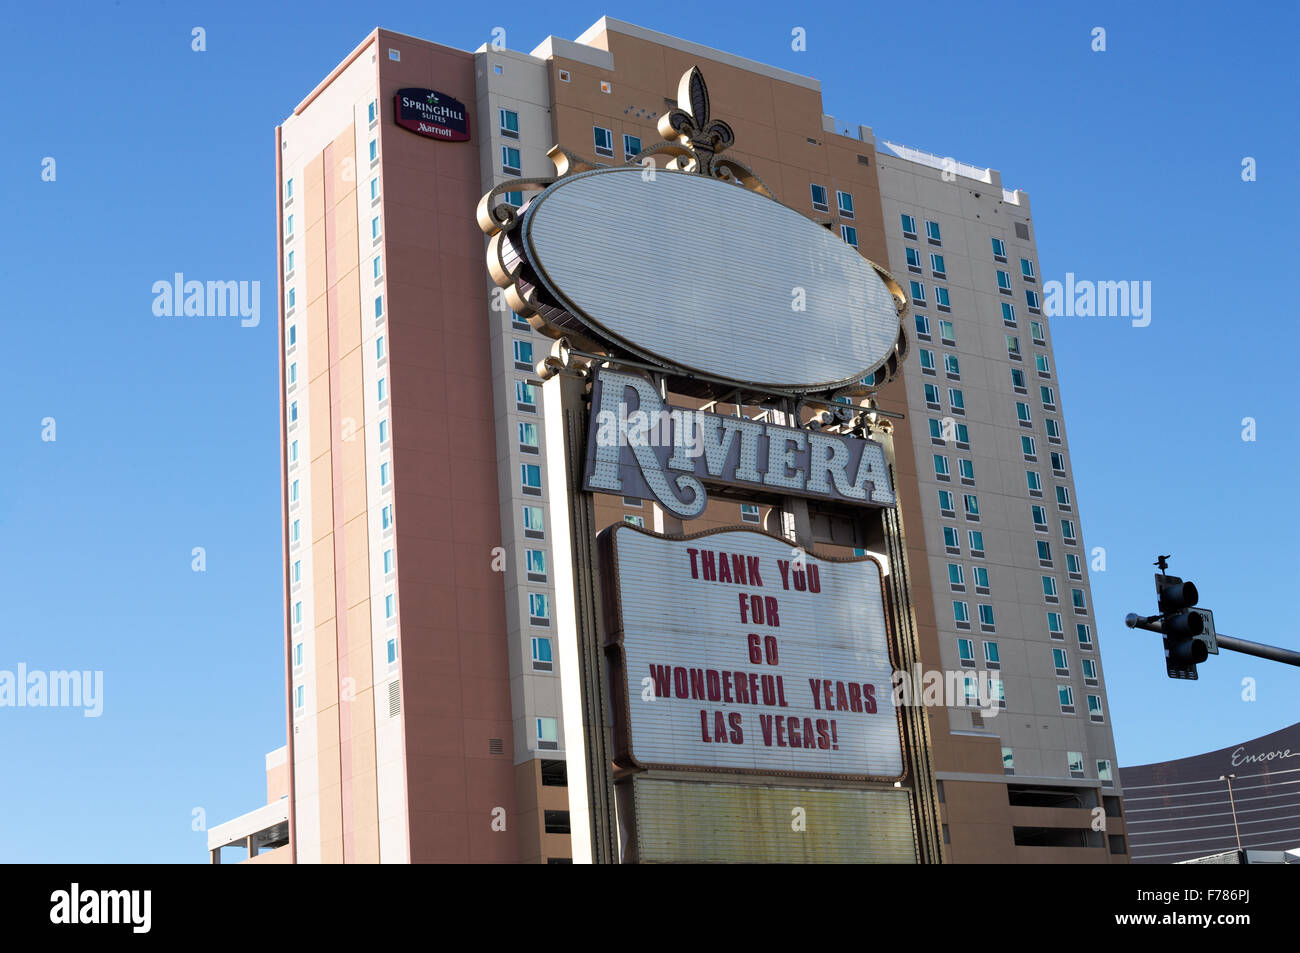 What replaced the Riviera Hotel in Las Vegas? - Quora